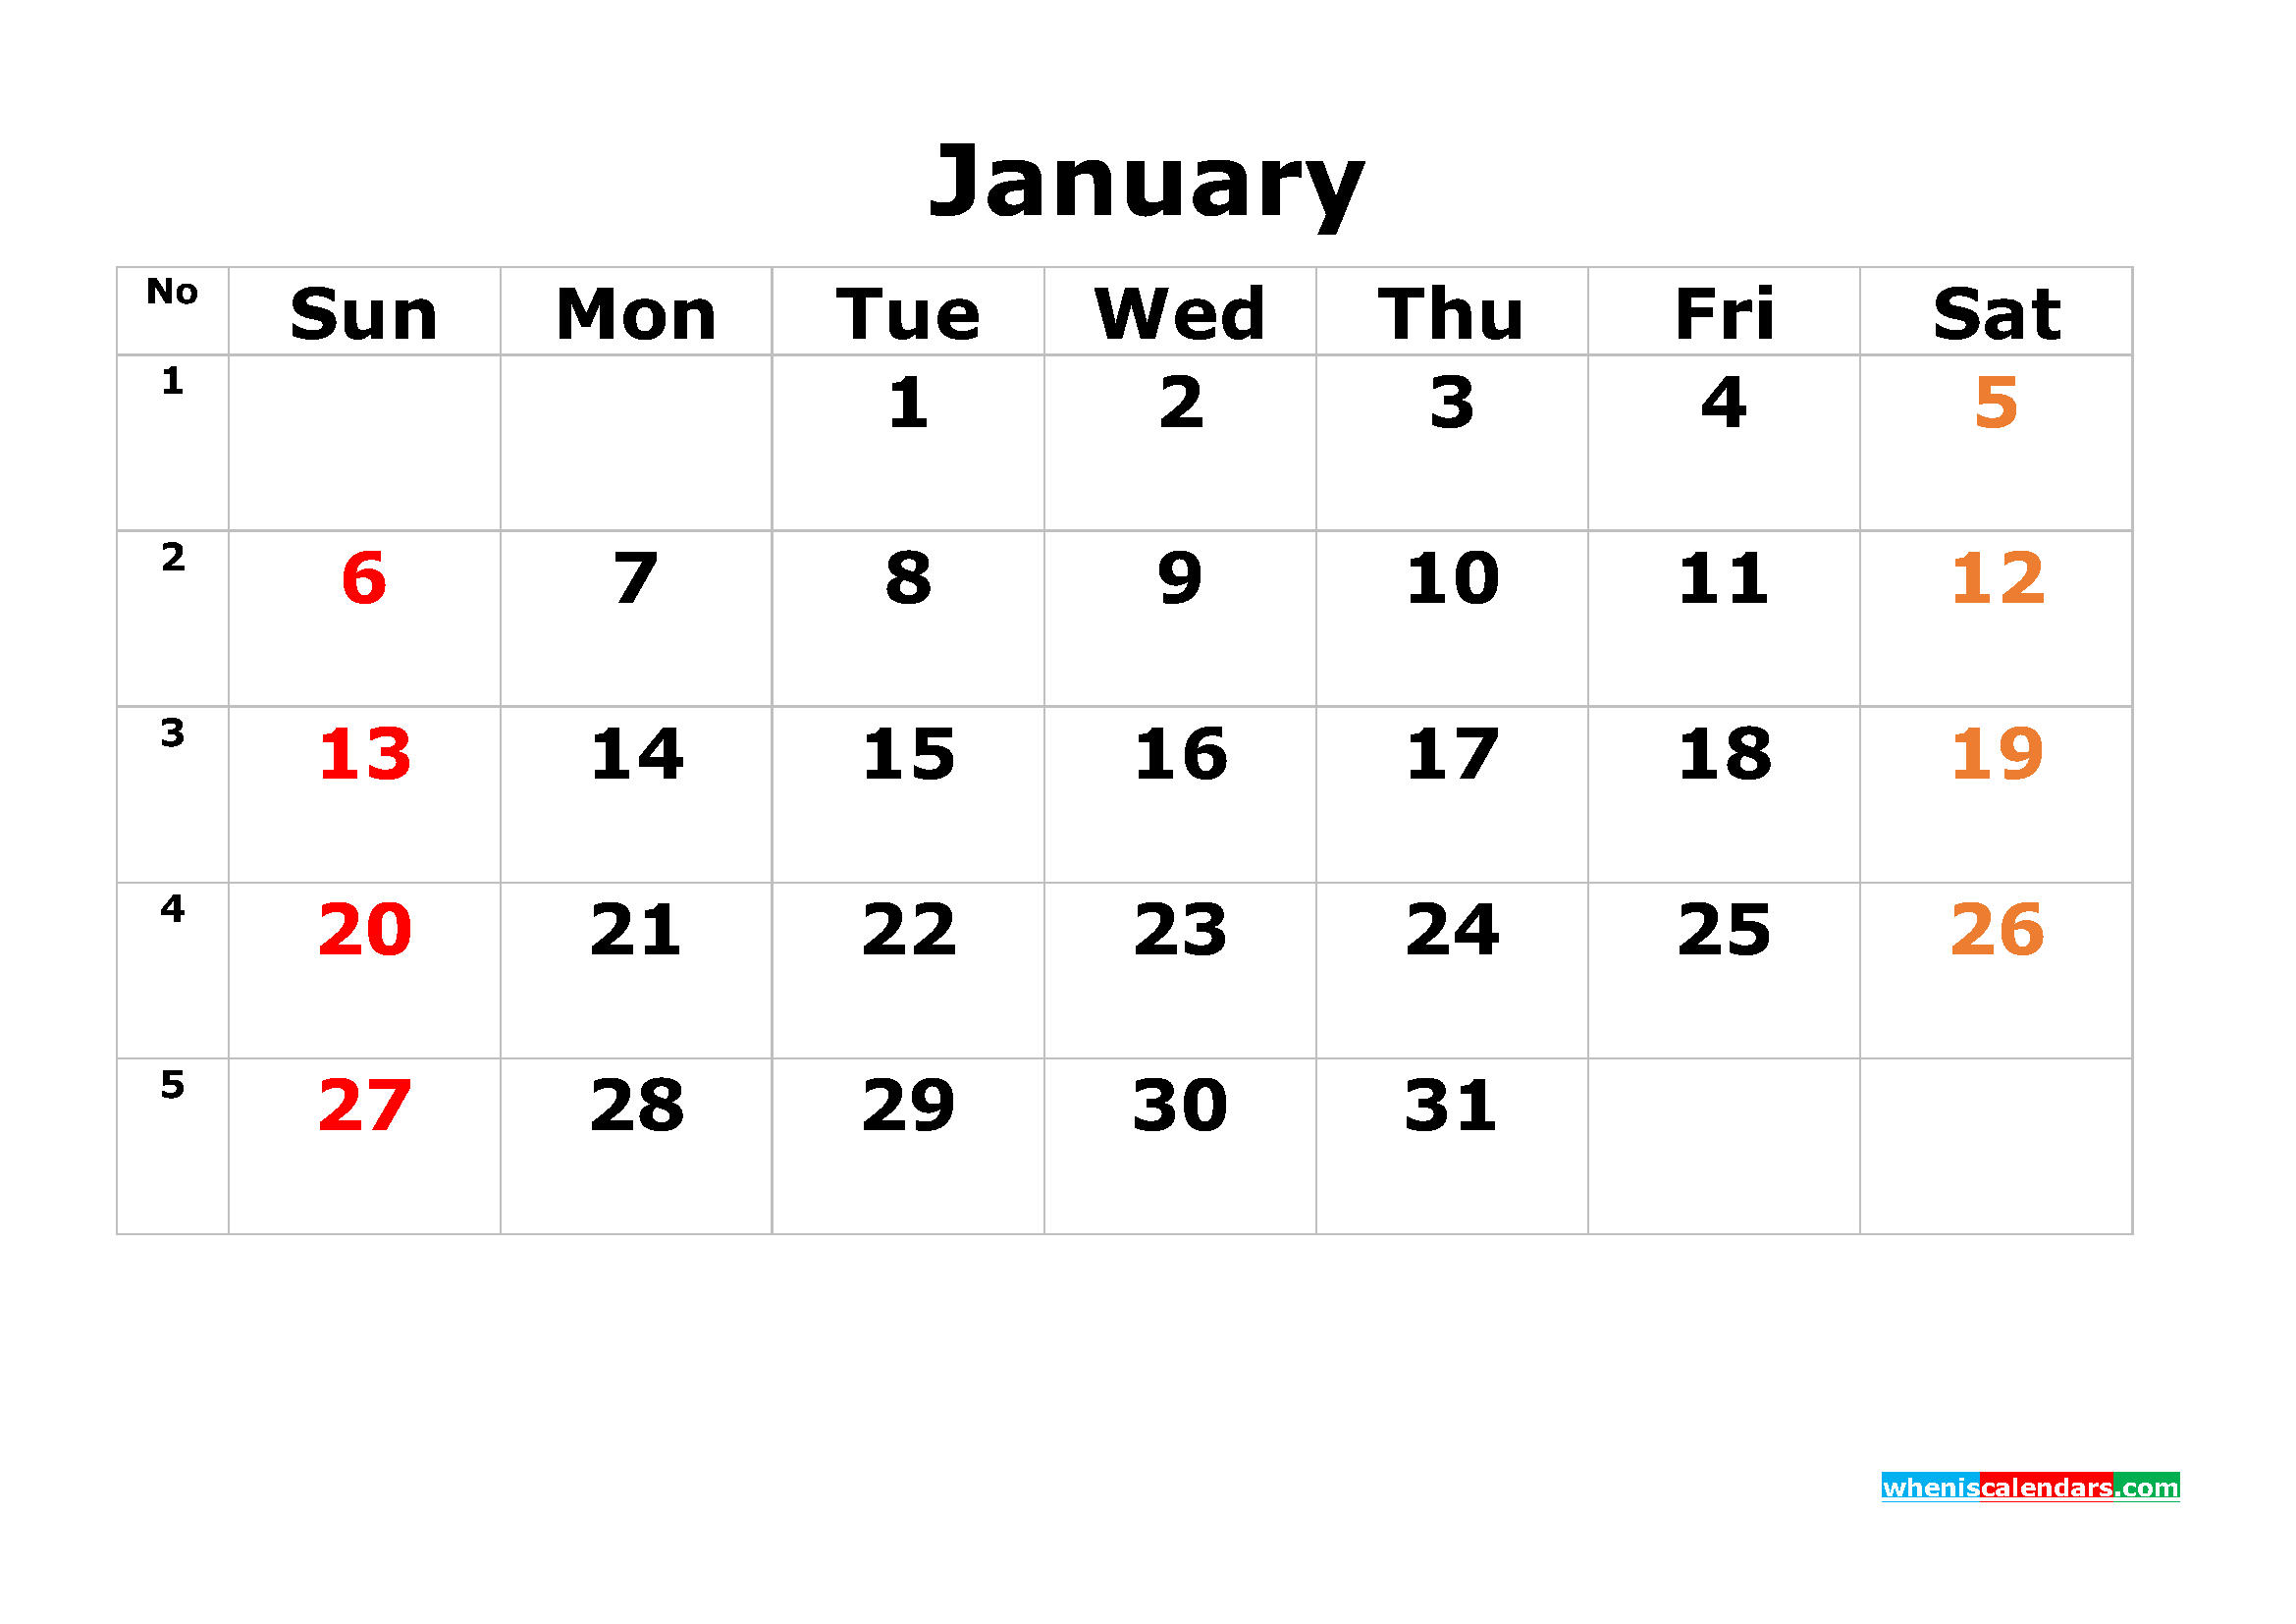 january-calendar-2019-template-download-on-pngtree